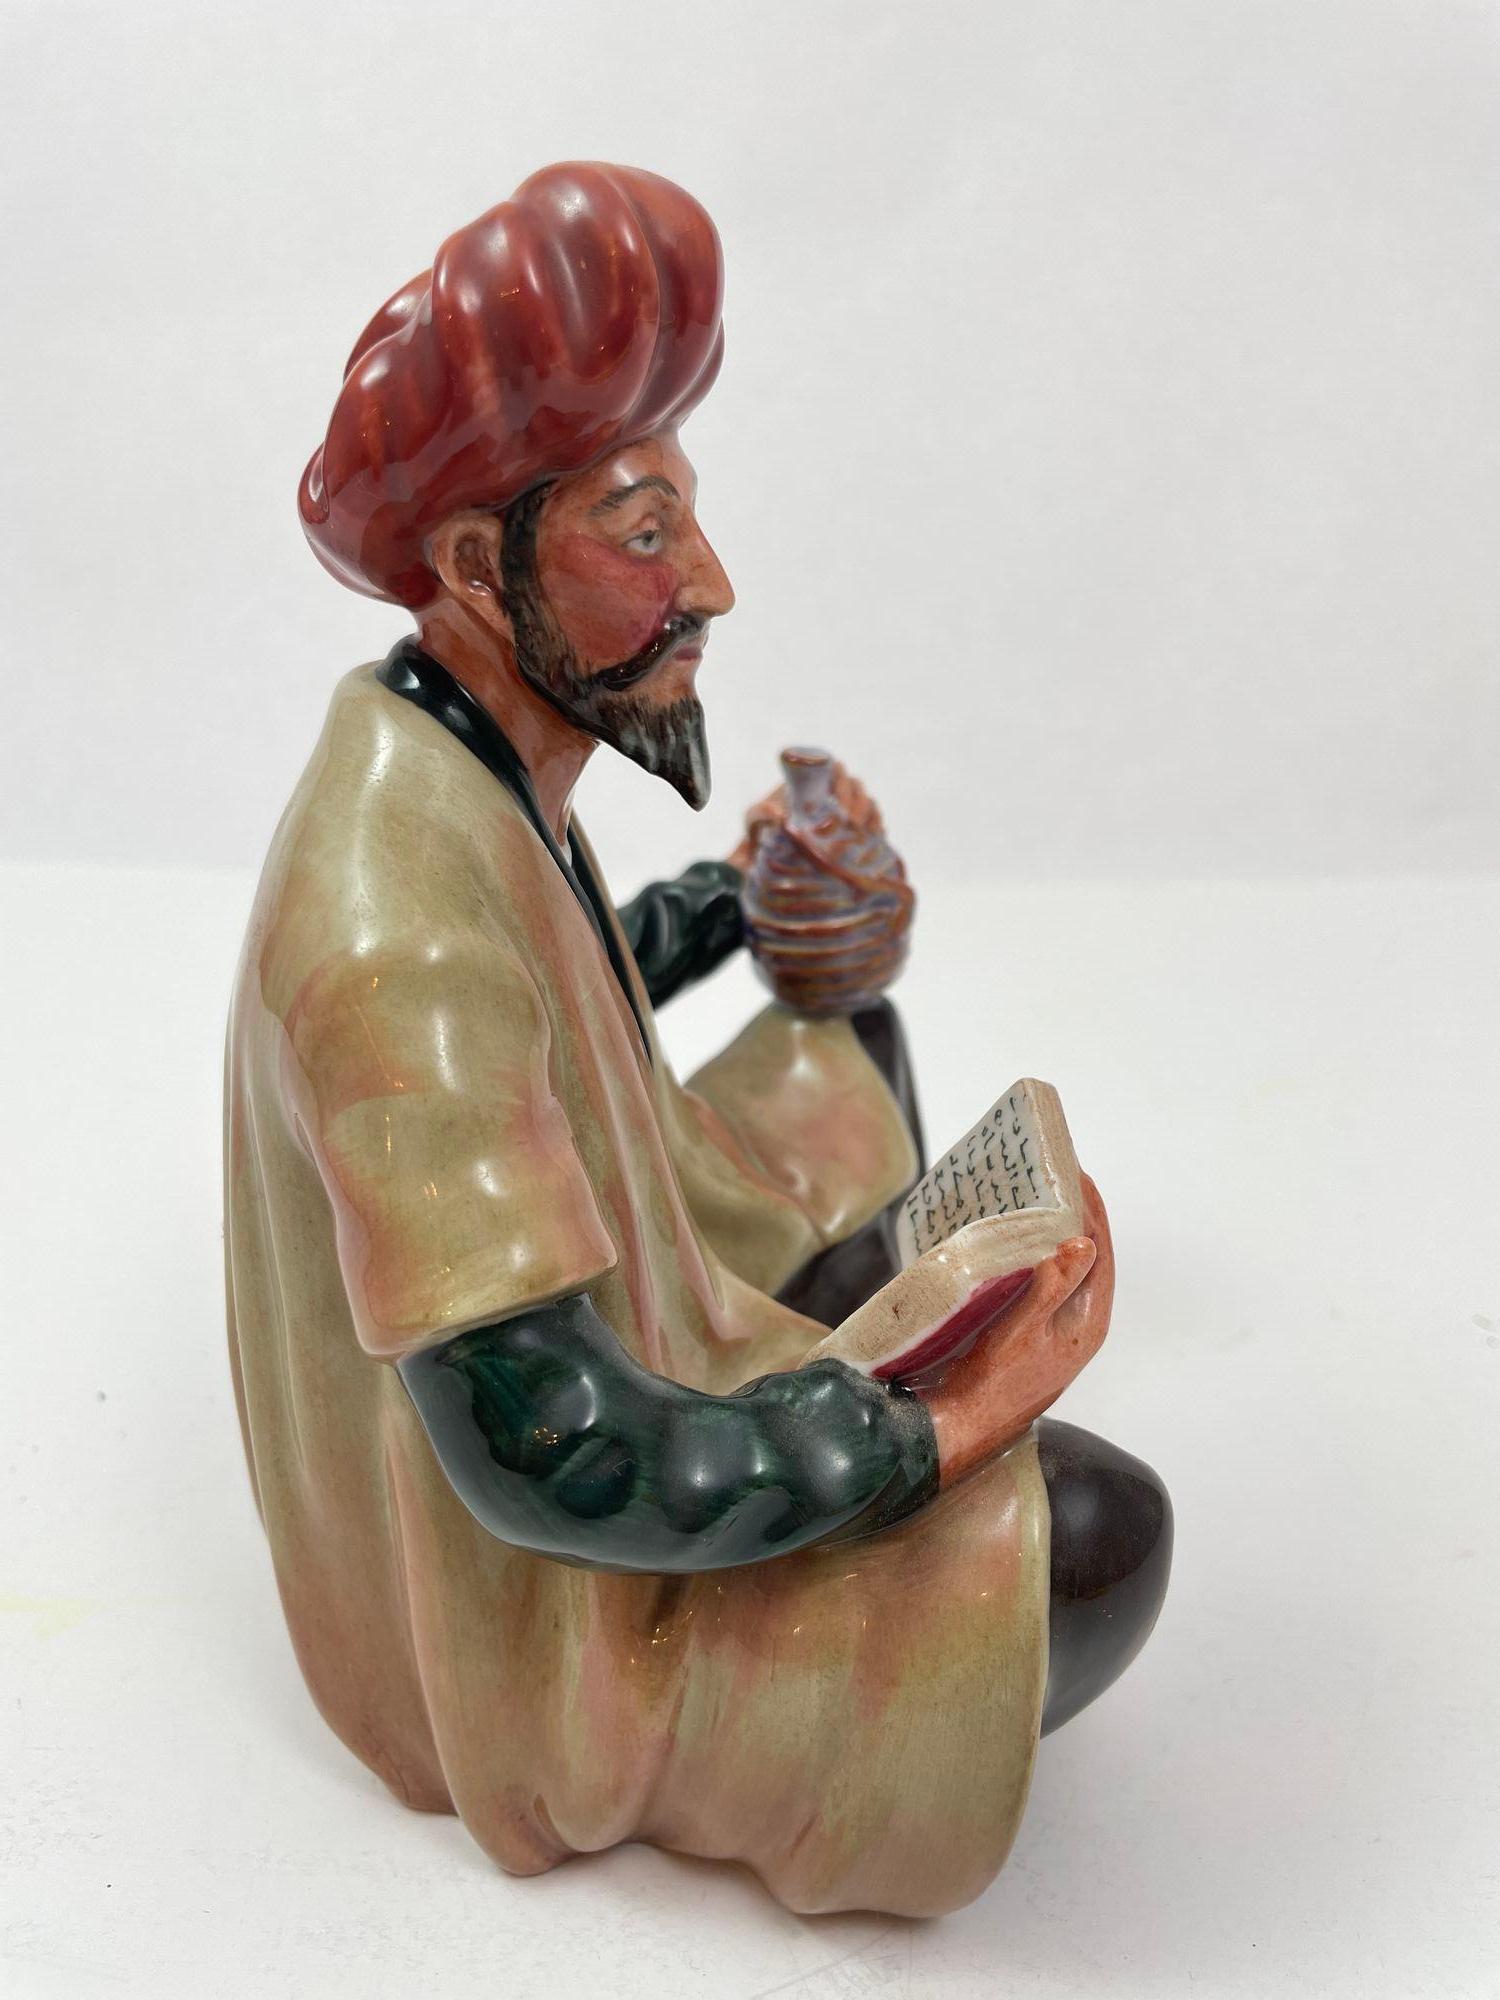 Royal Doulton Porcelain Figurine “Omar Khayyam” Persian Scholar 1964 In Good Condition For Sale In North Hollywood, CA